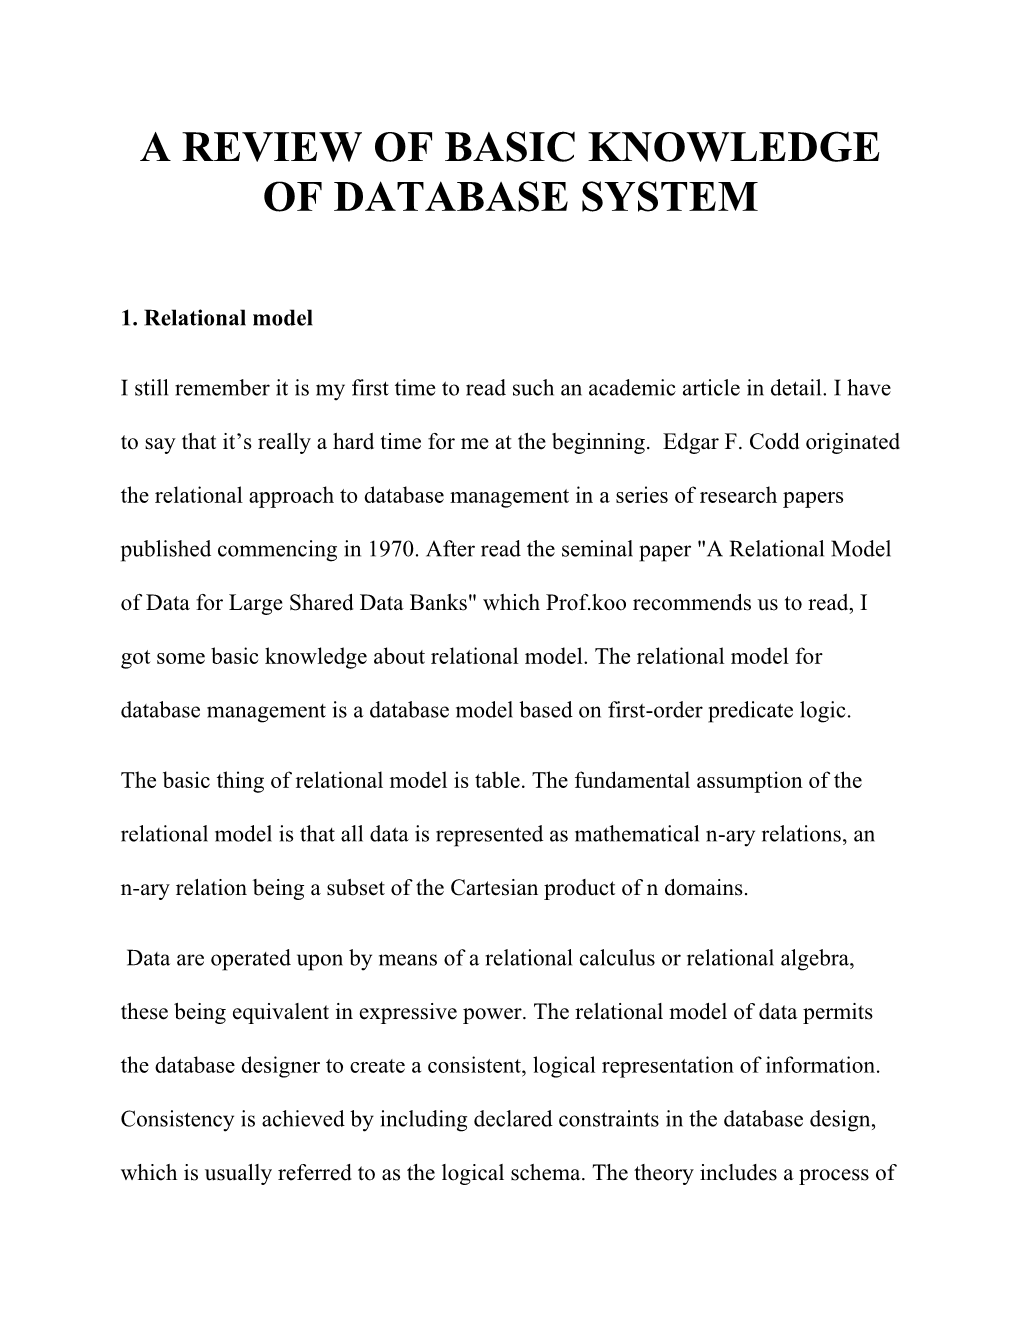 A Review of Basic Knowledge of Database System